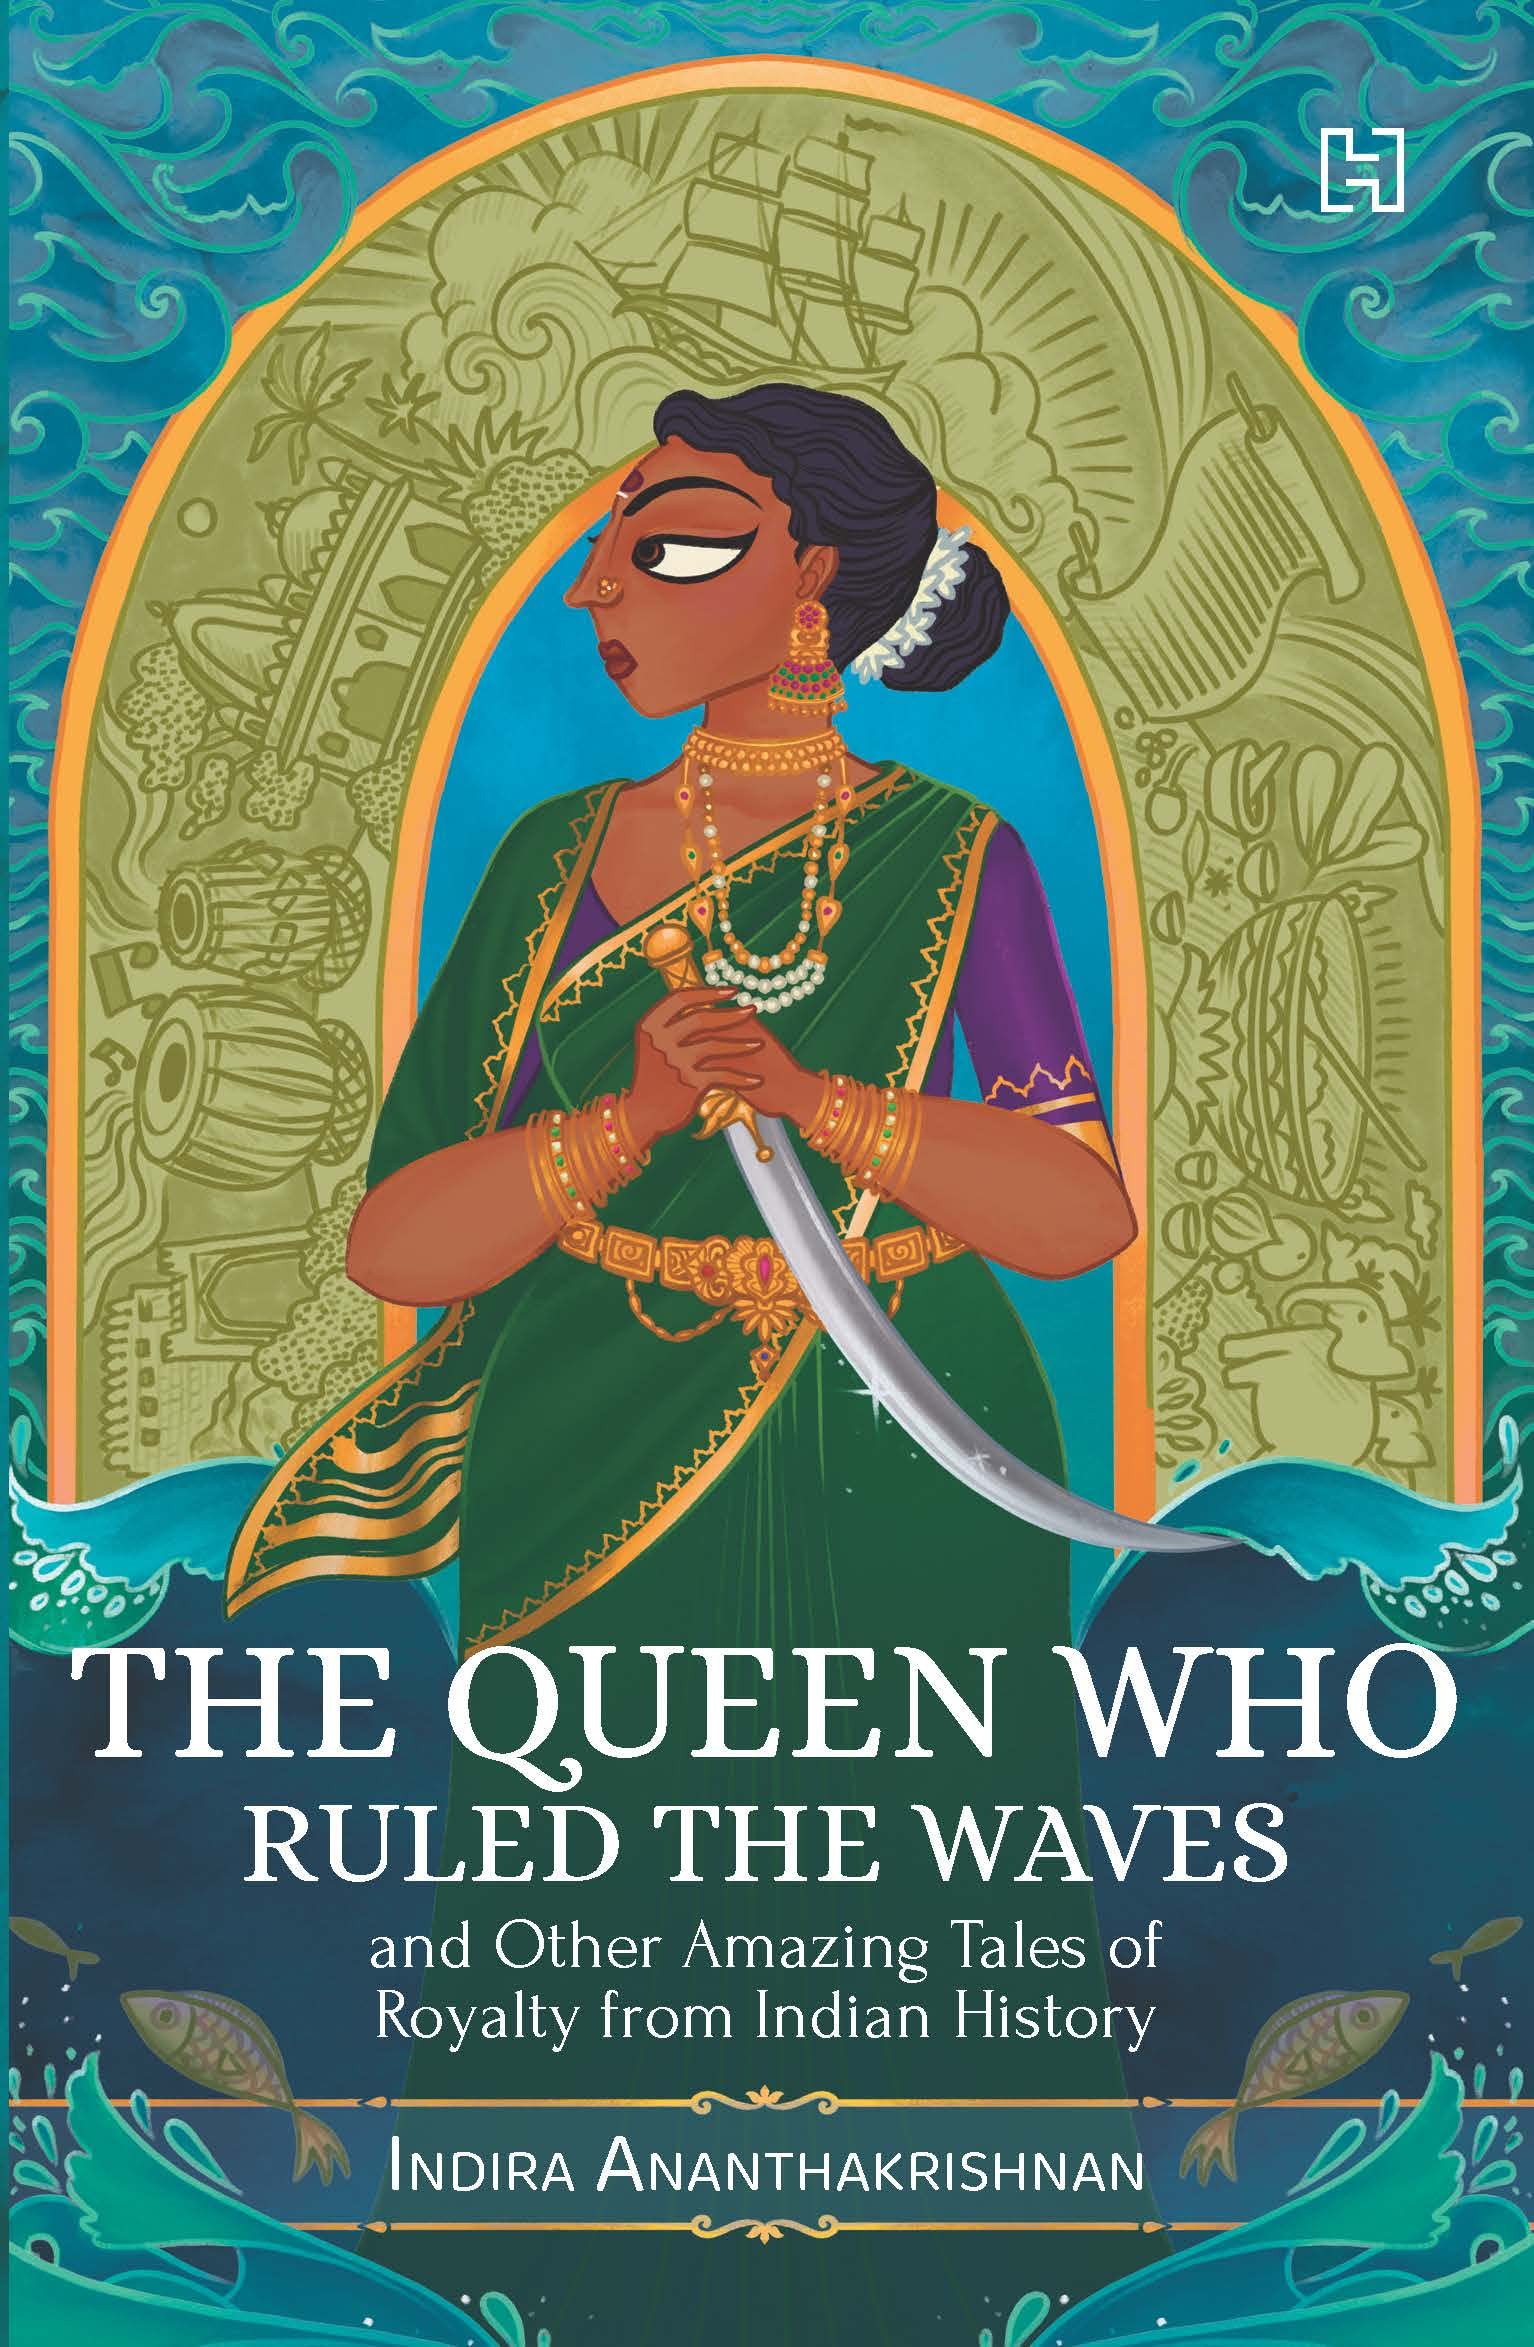 You are currently viewing The Queen Who Ruled the Waves and Other Amazing Tales of Royalty from Indian History by Indira Ananthakrishnan